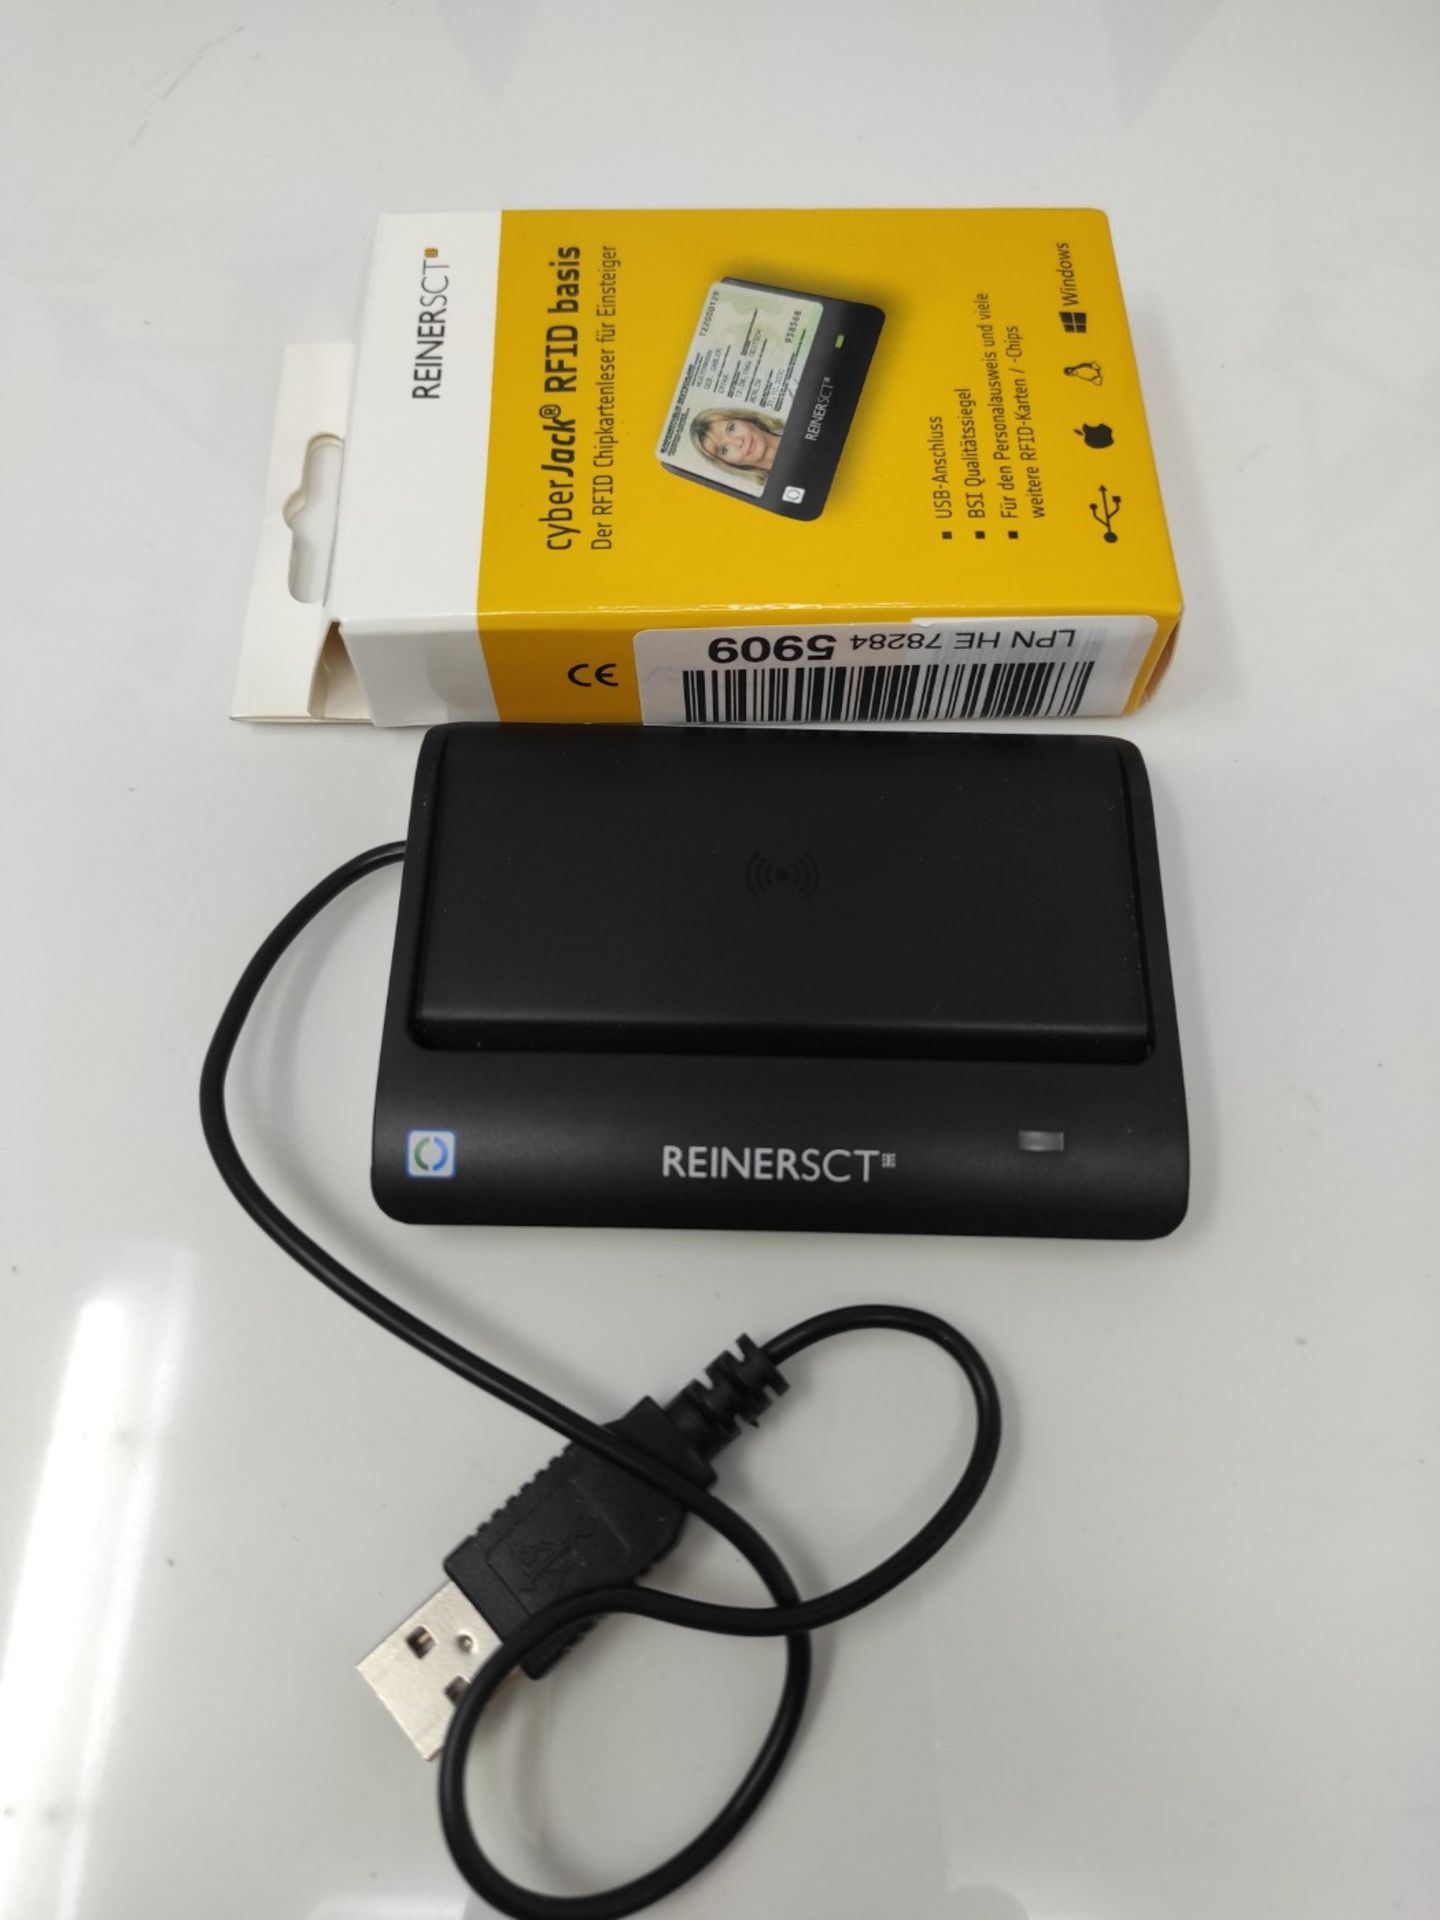 REINER SCT cyberJack RFID chip card reader basic | For the new identity card (nPA) Bla - Image 2 of 2